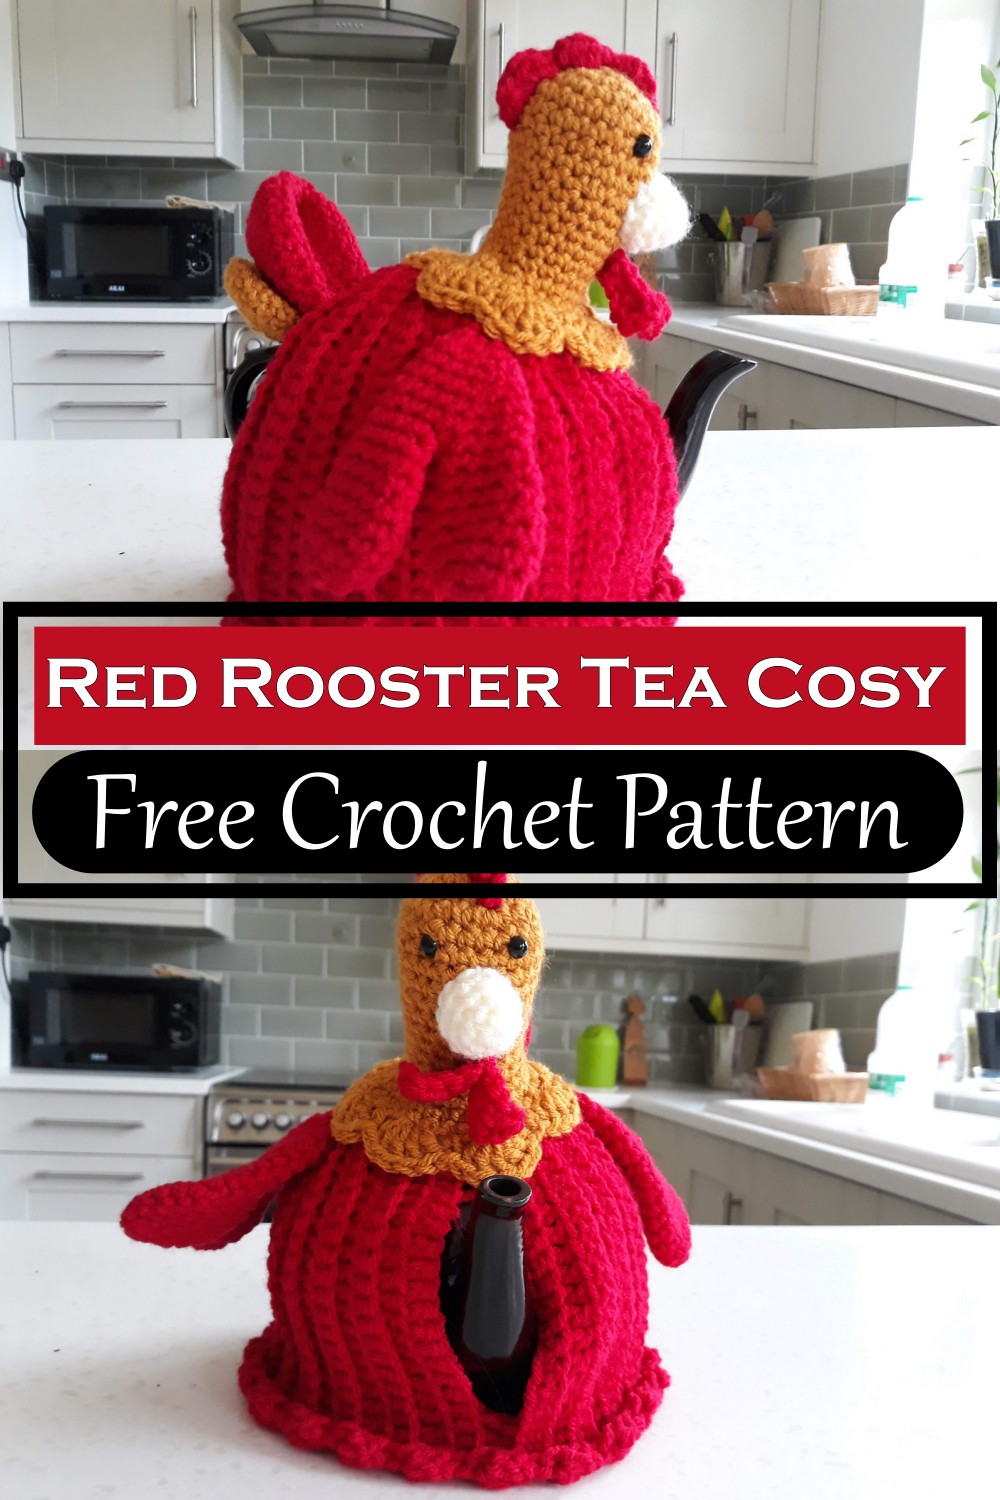 Red Rooster Tea Cosy